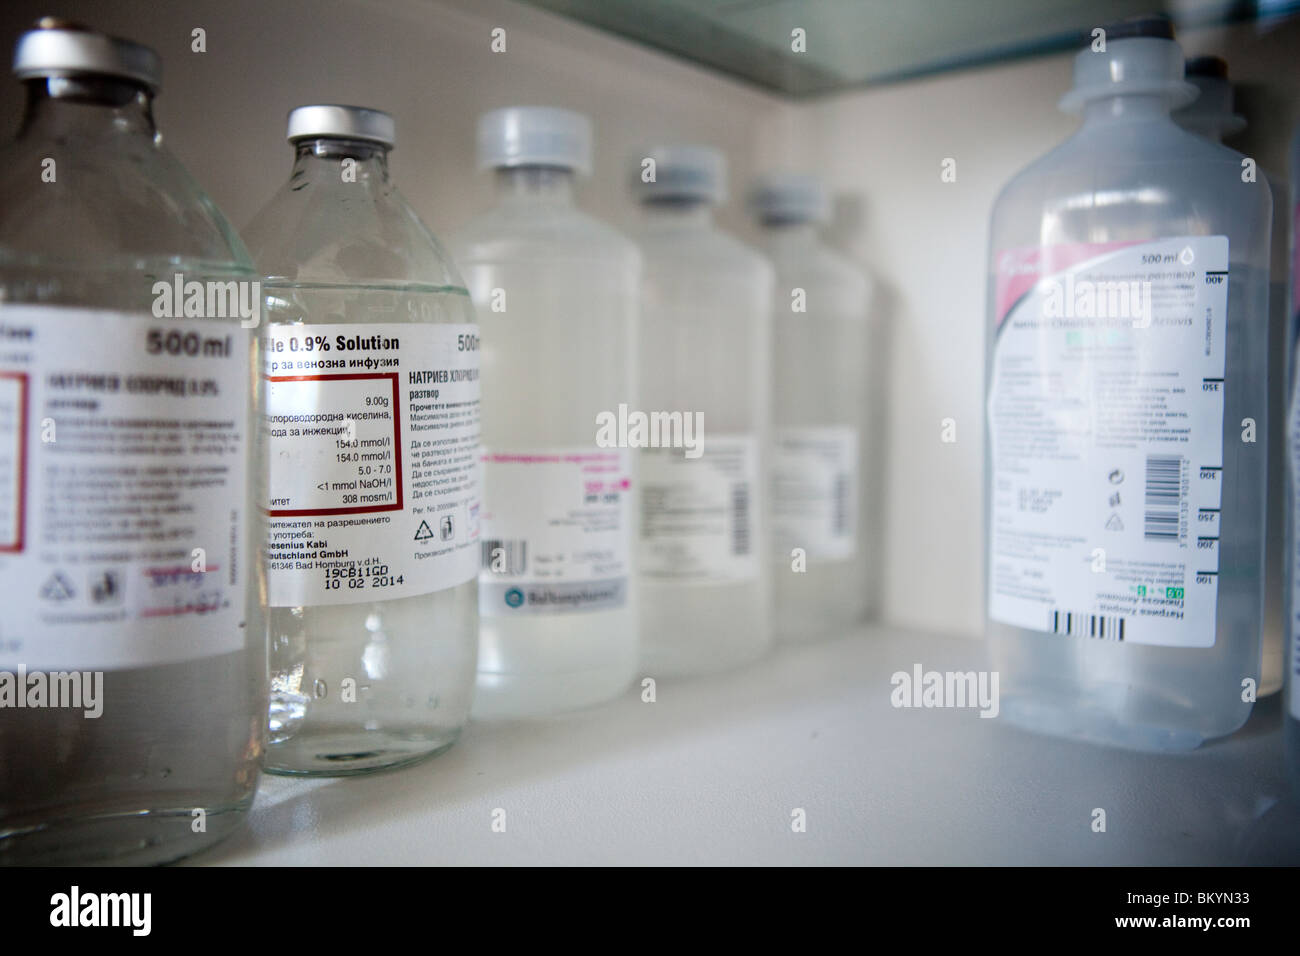 Saline drip infusion liquid stored in medical cabinet in a hospital Stock Photo